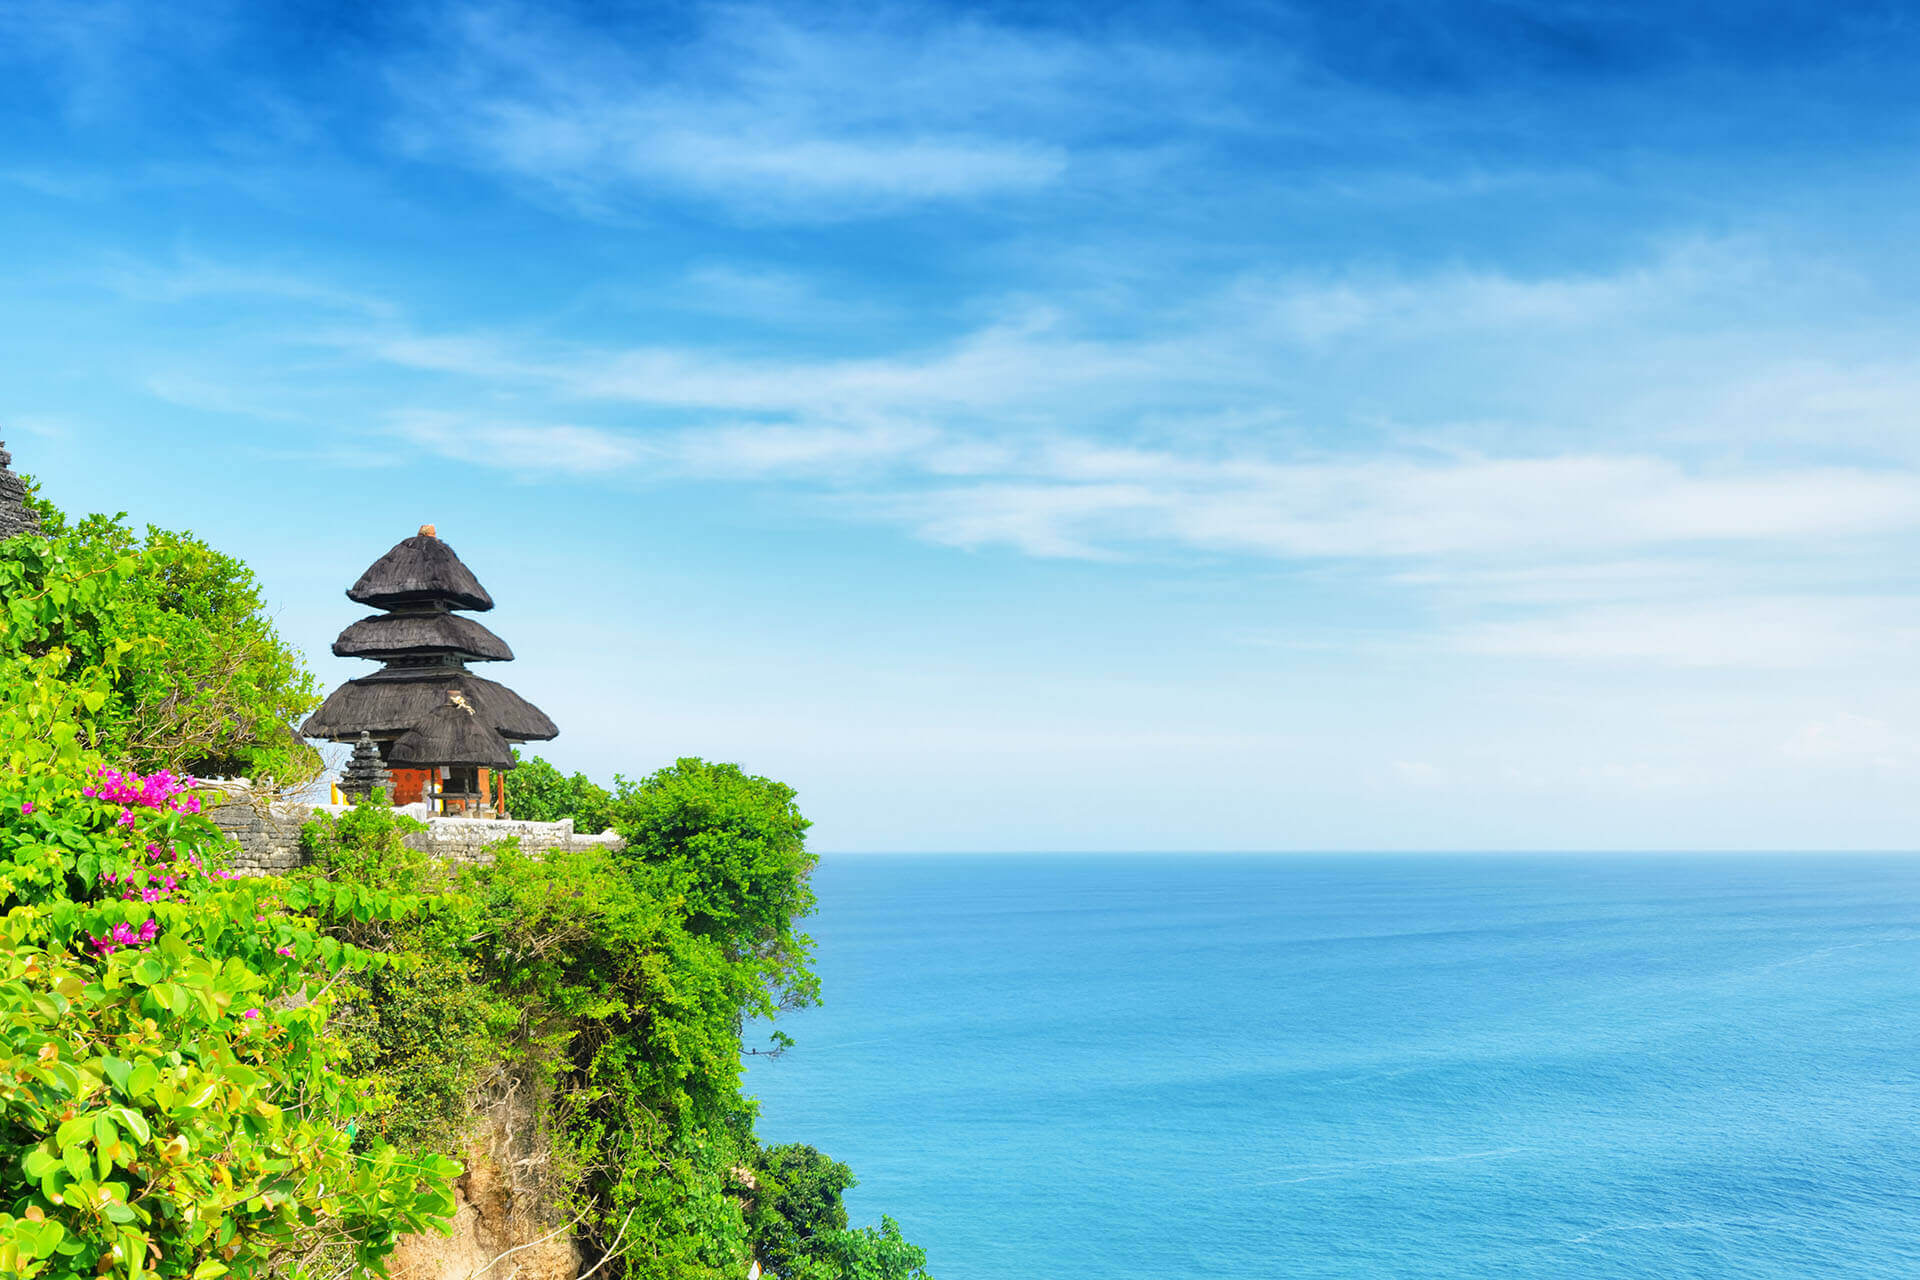 Indonesia: Travel Permitted for Certain Categories